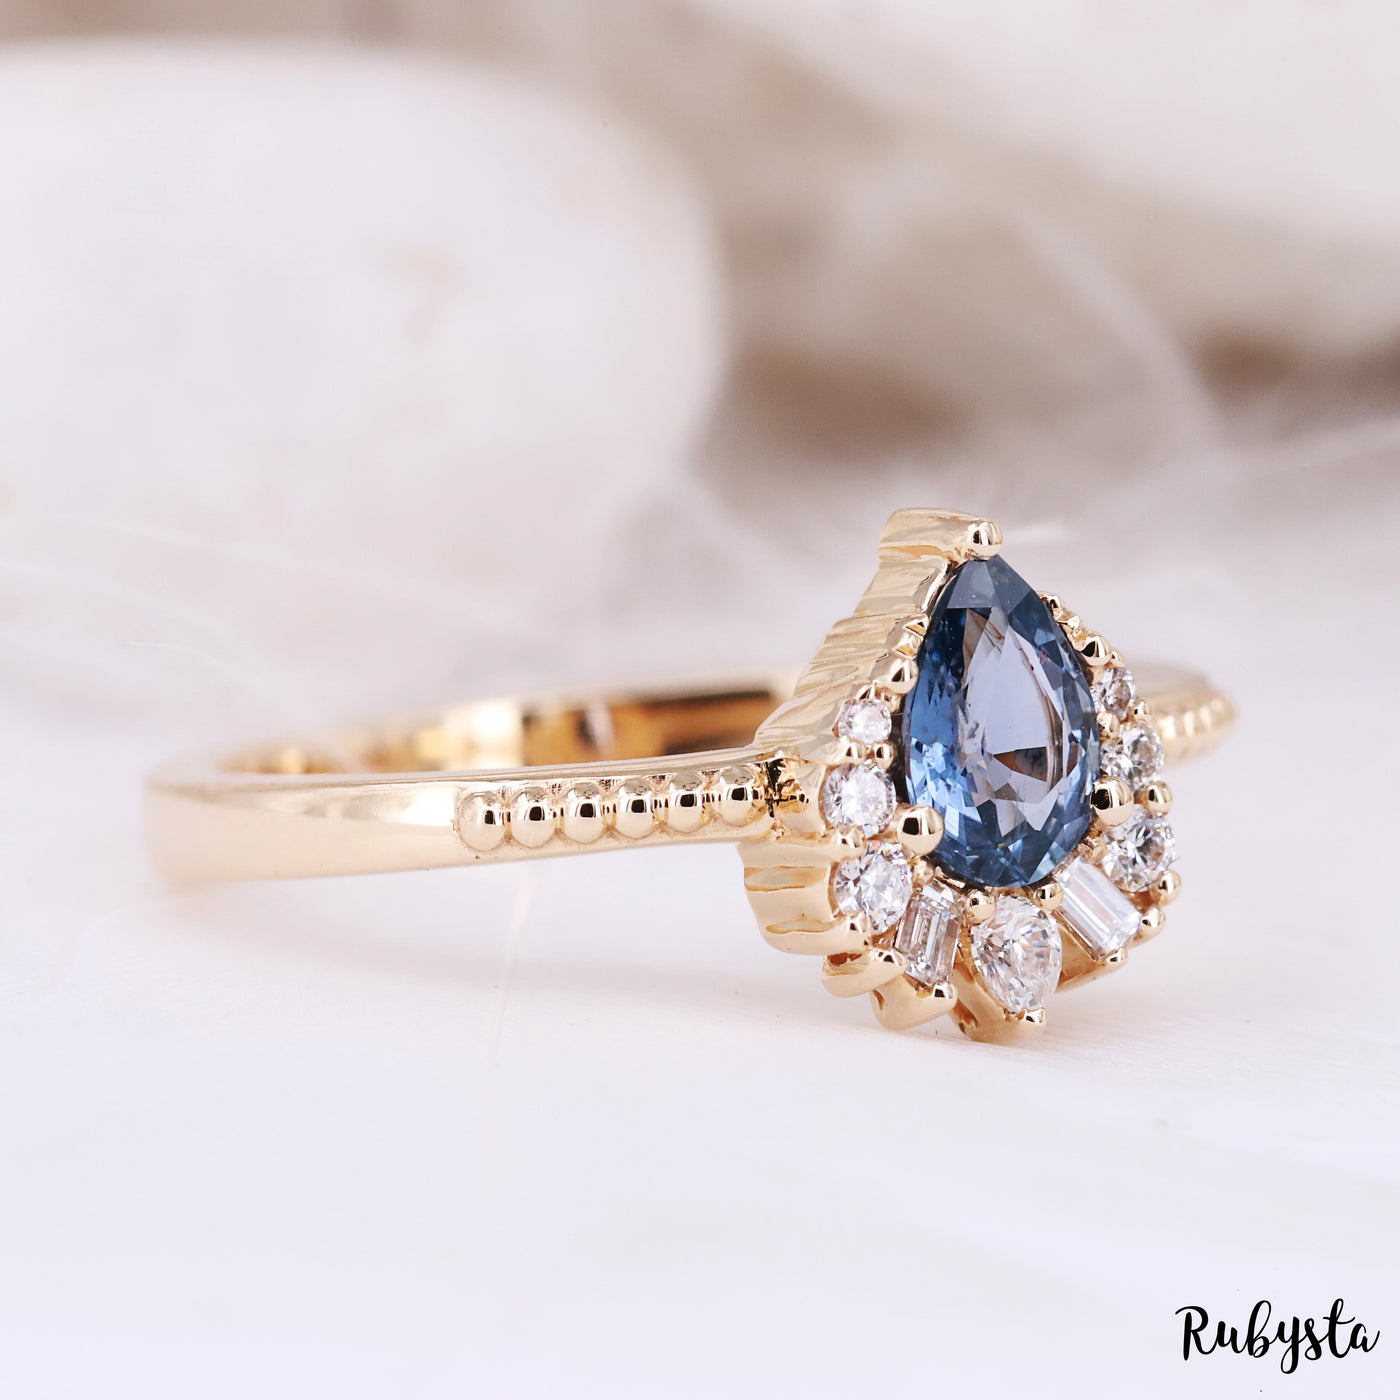 Beautiful Natural Blue Sapphire Gemstone Ring - Perfect for any Occasion